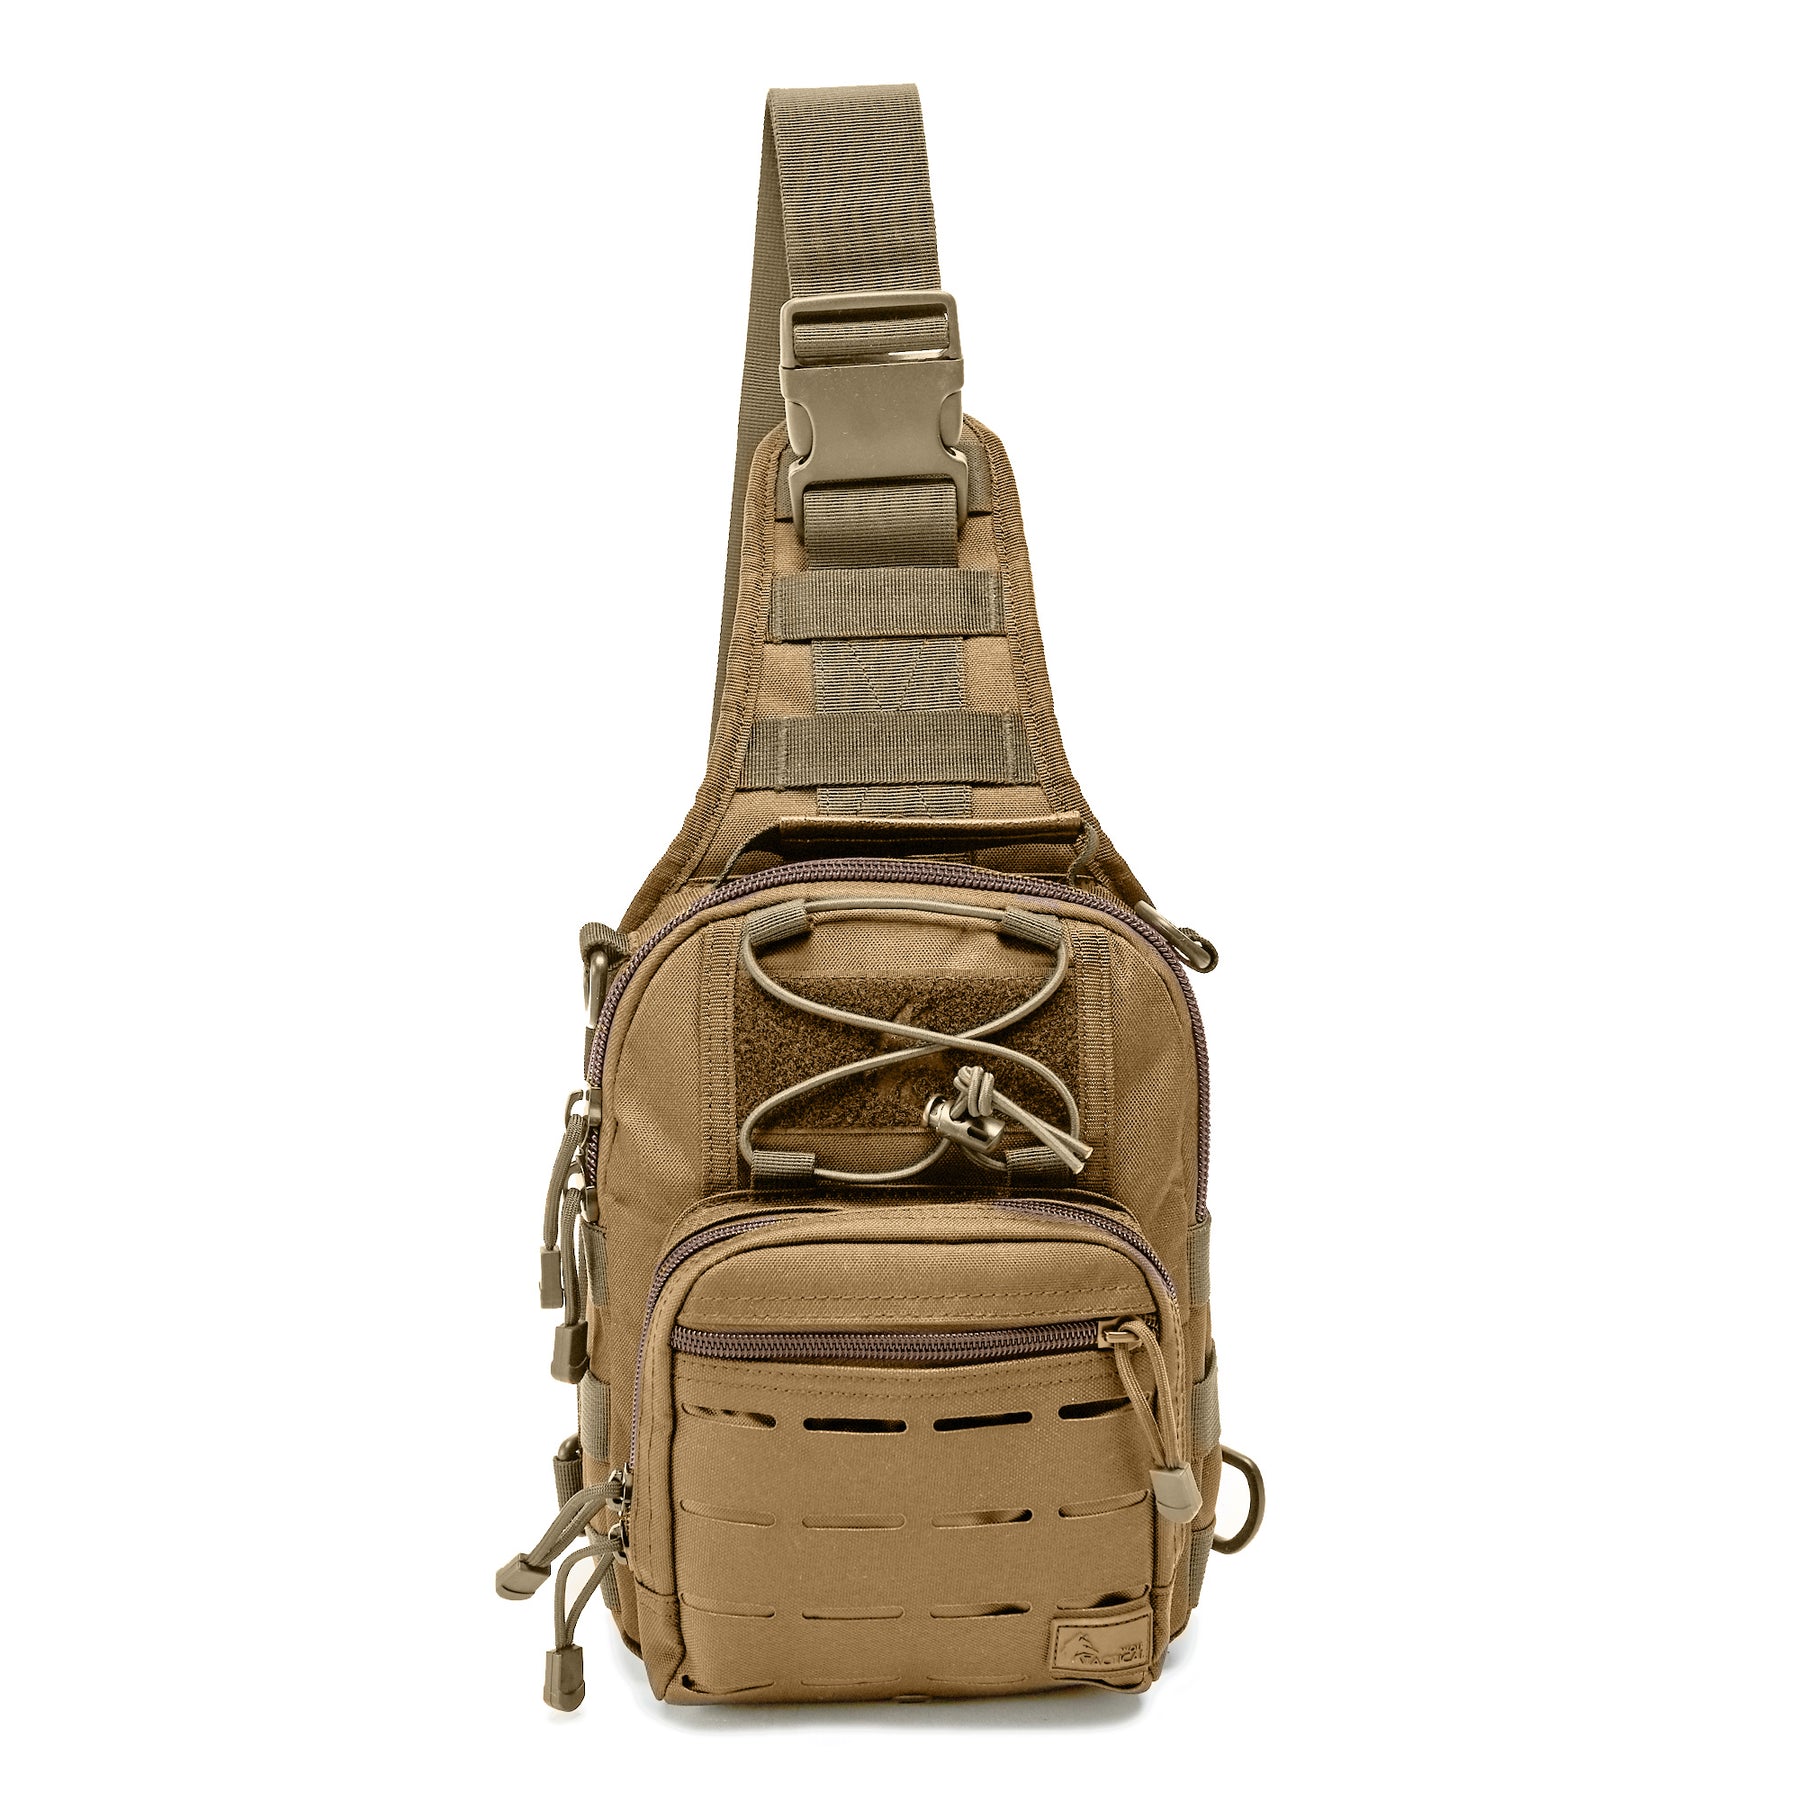 Best Tactical EDC Sling Bag Online  Wolf Tactical